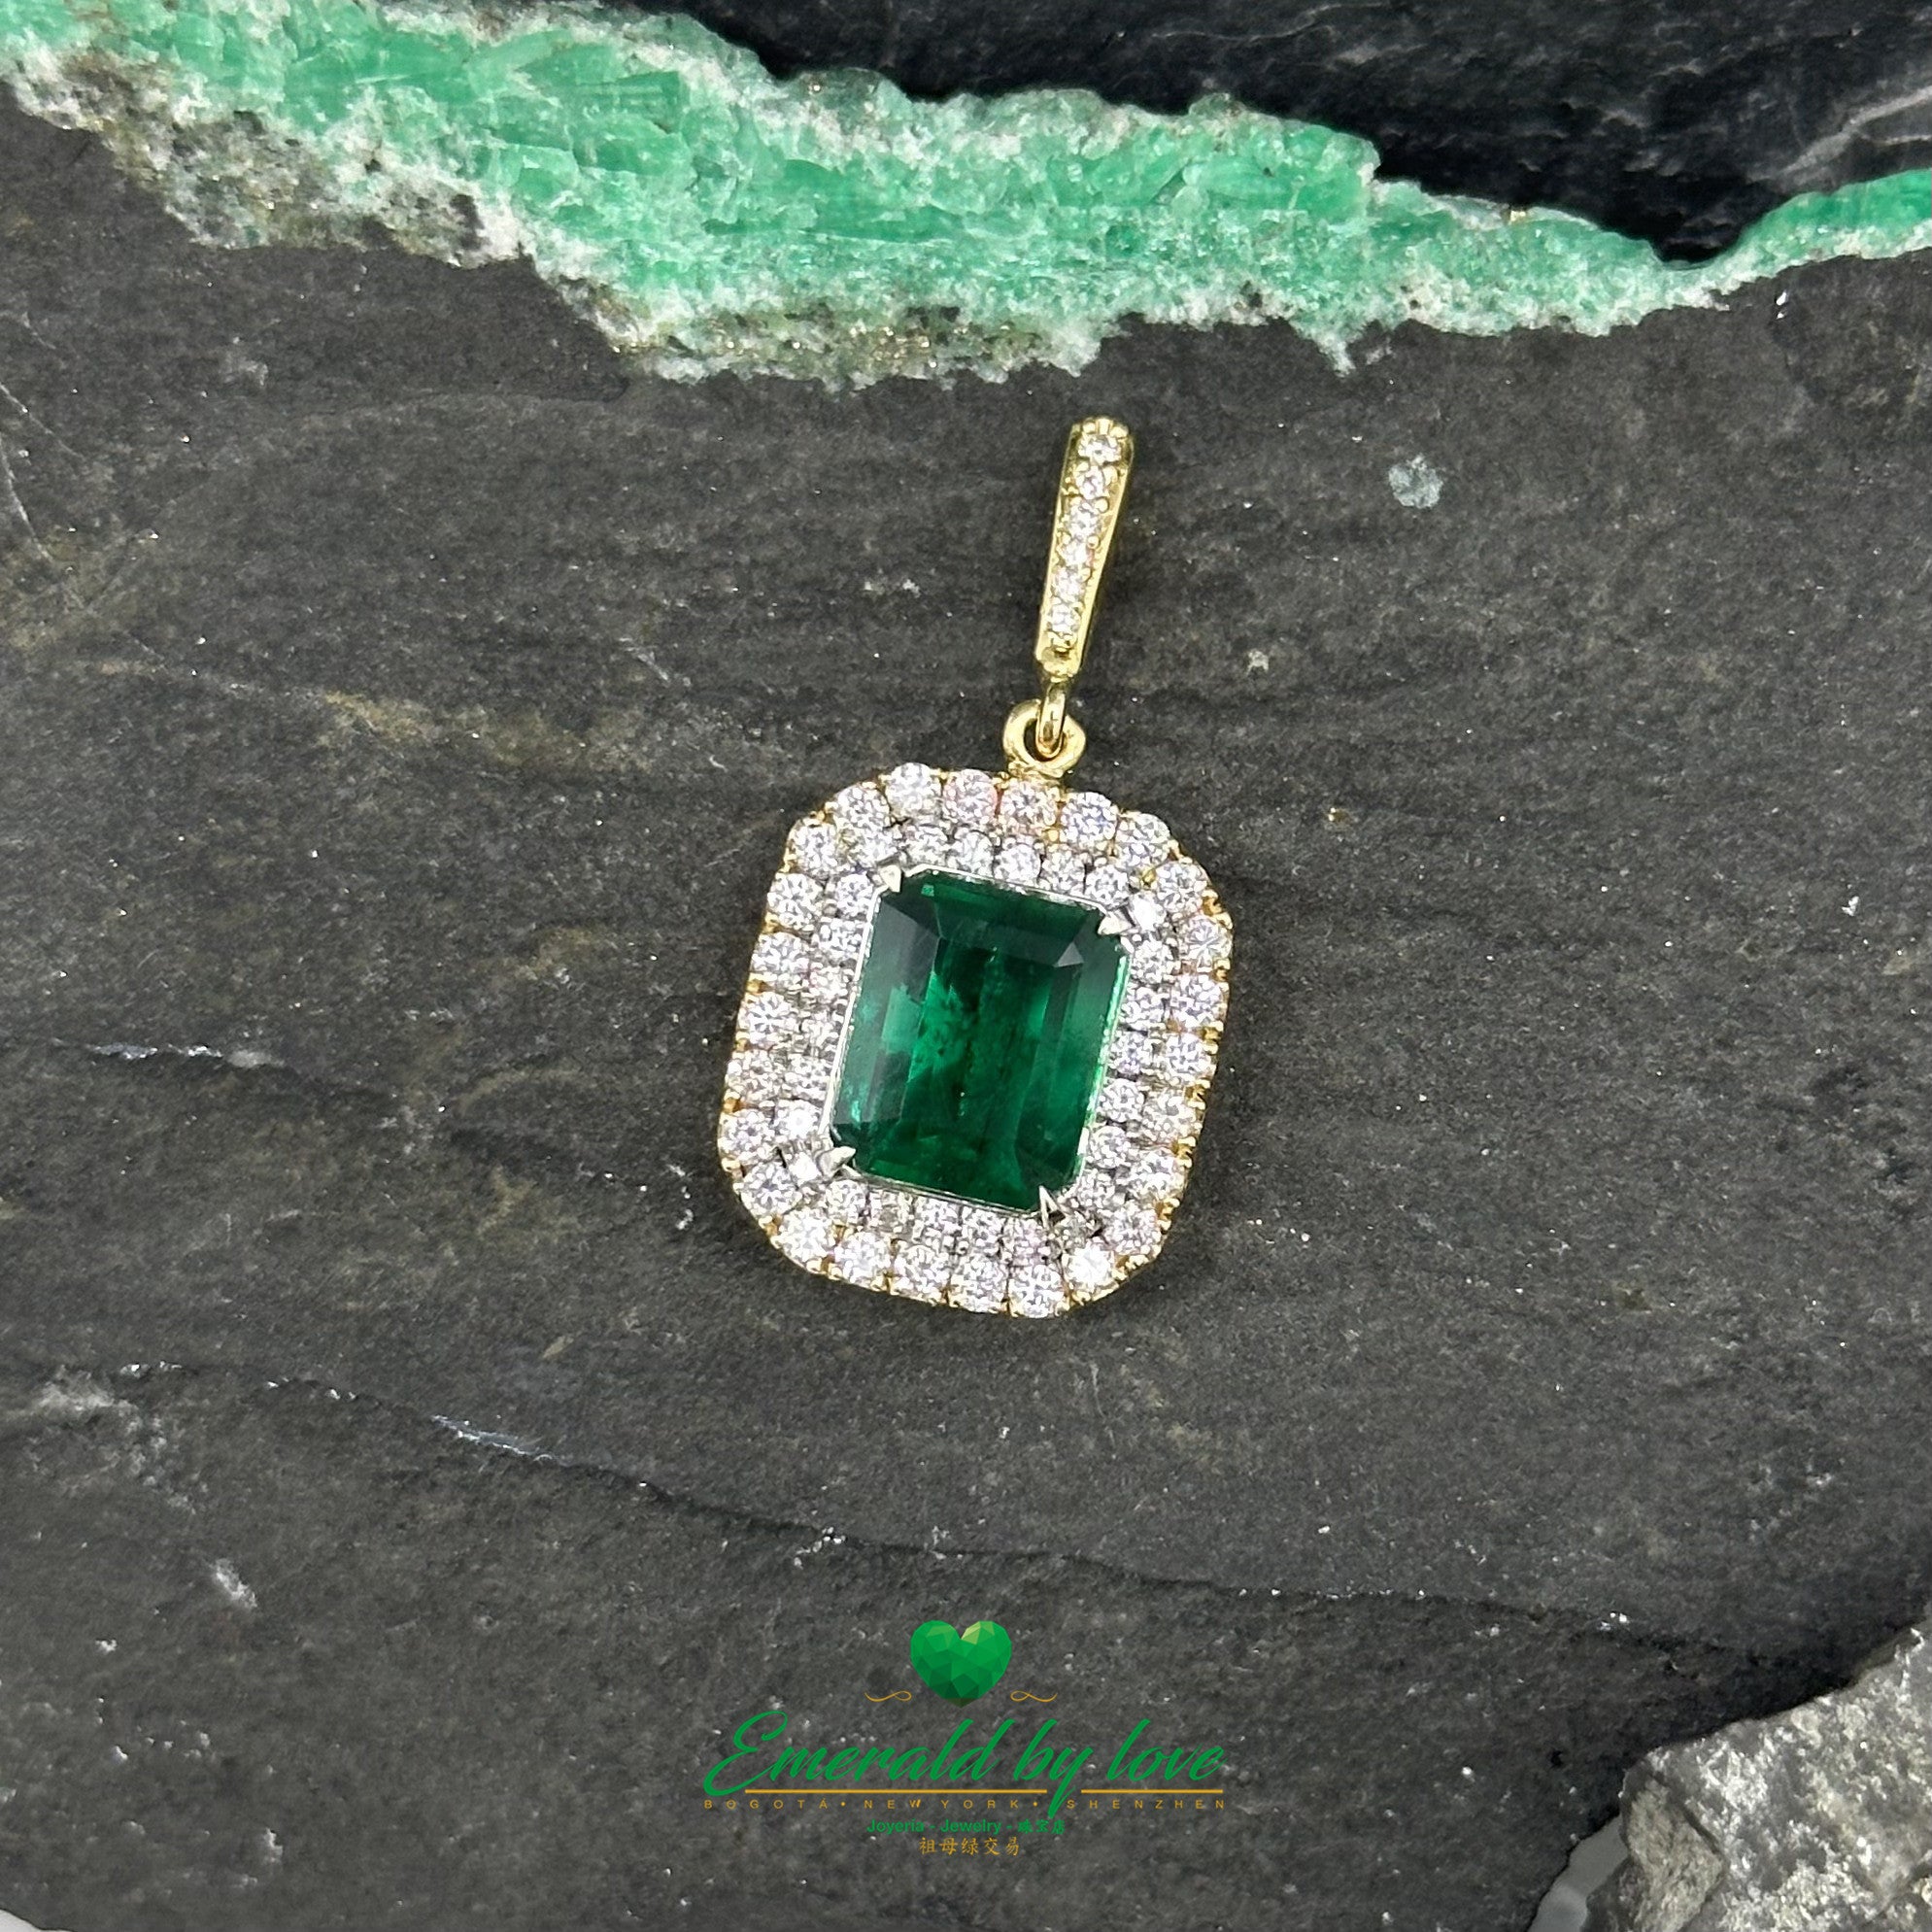 Exquisite Yellow Gold Marquise Pendant with Emerald Cut Emerald and Diamond Halo